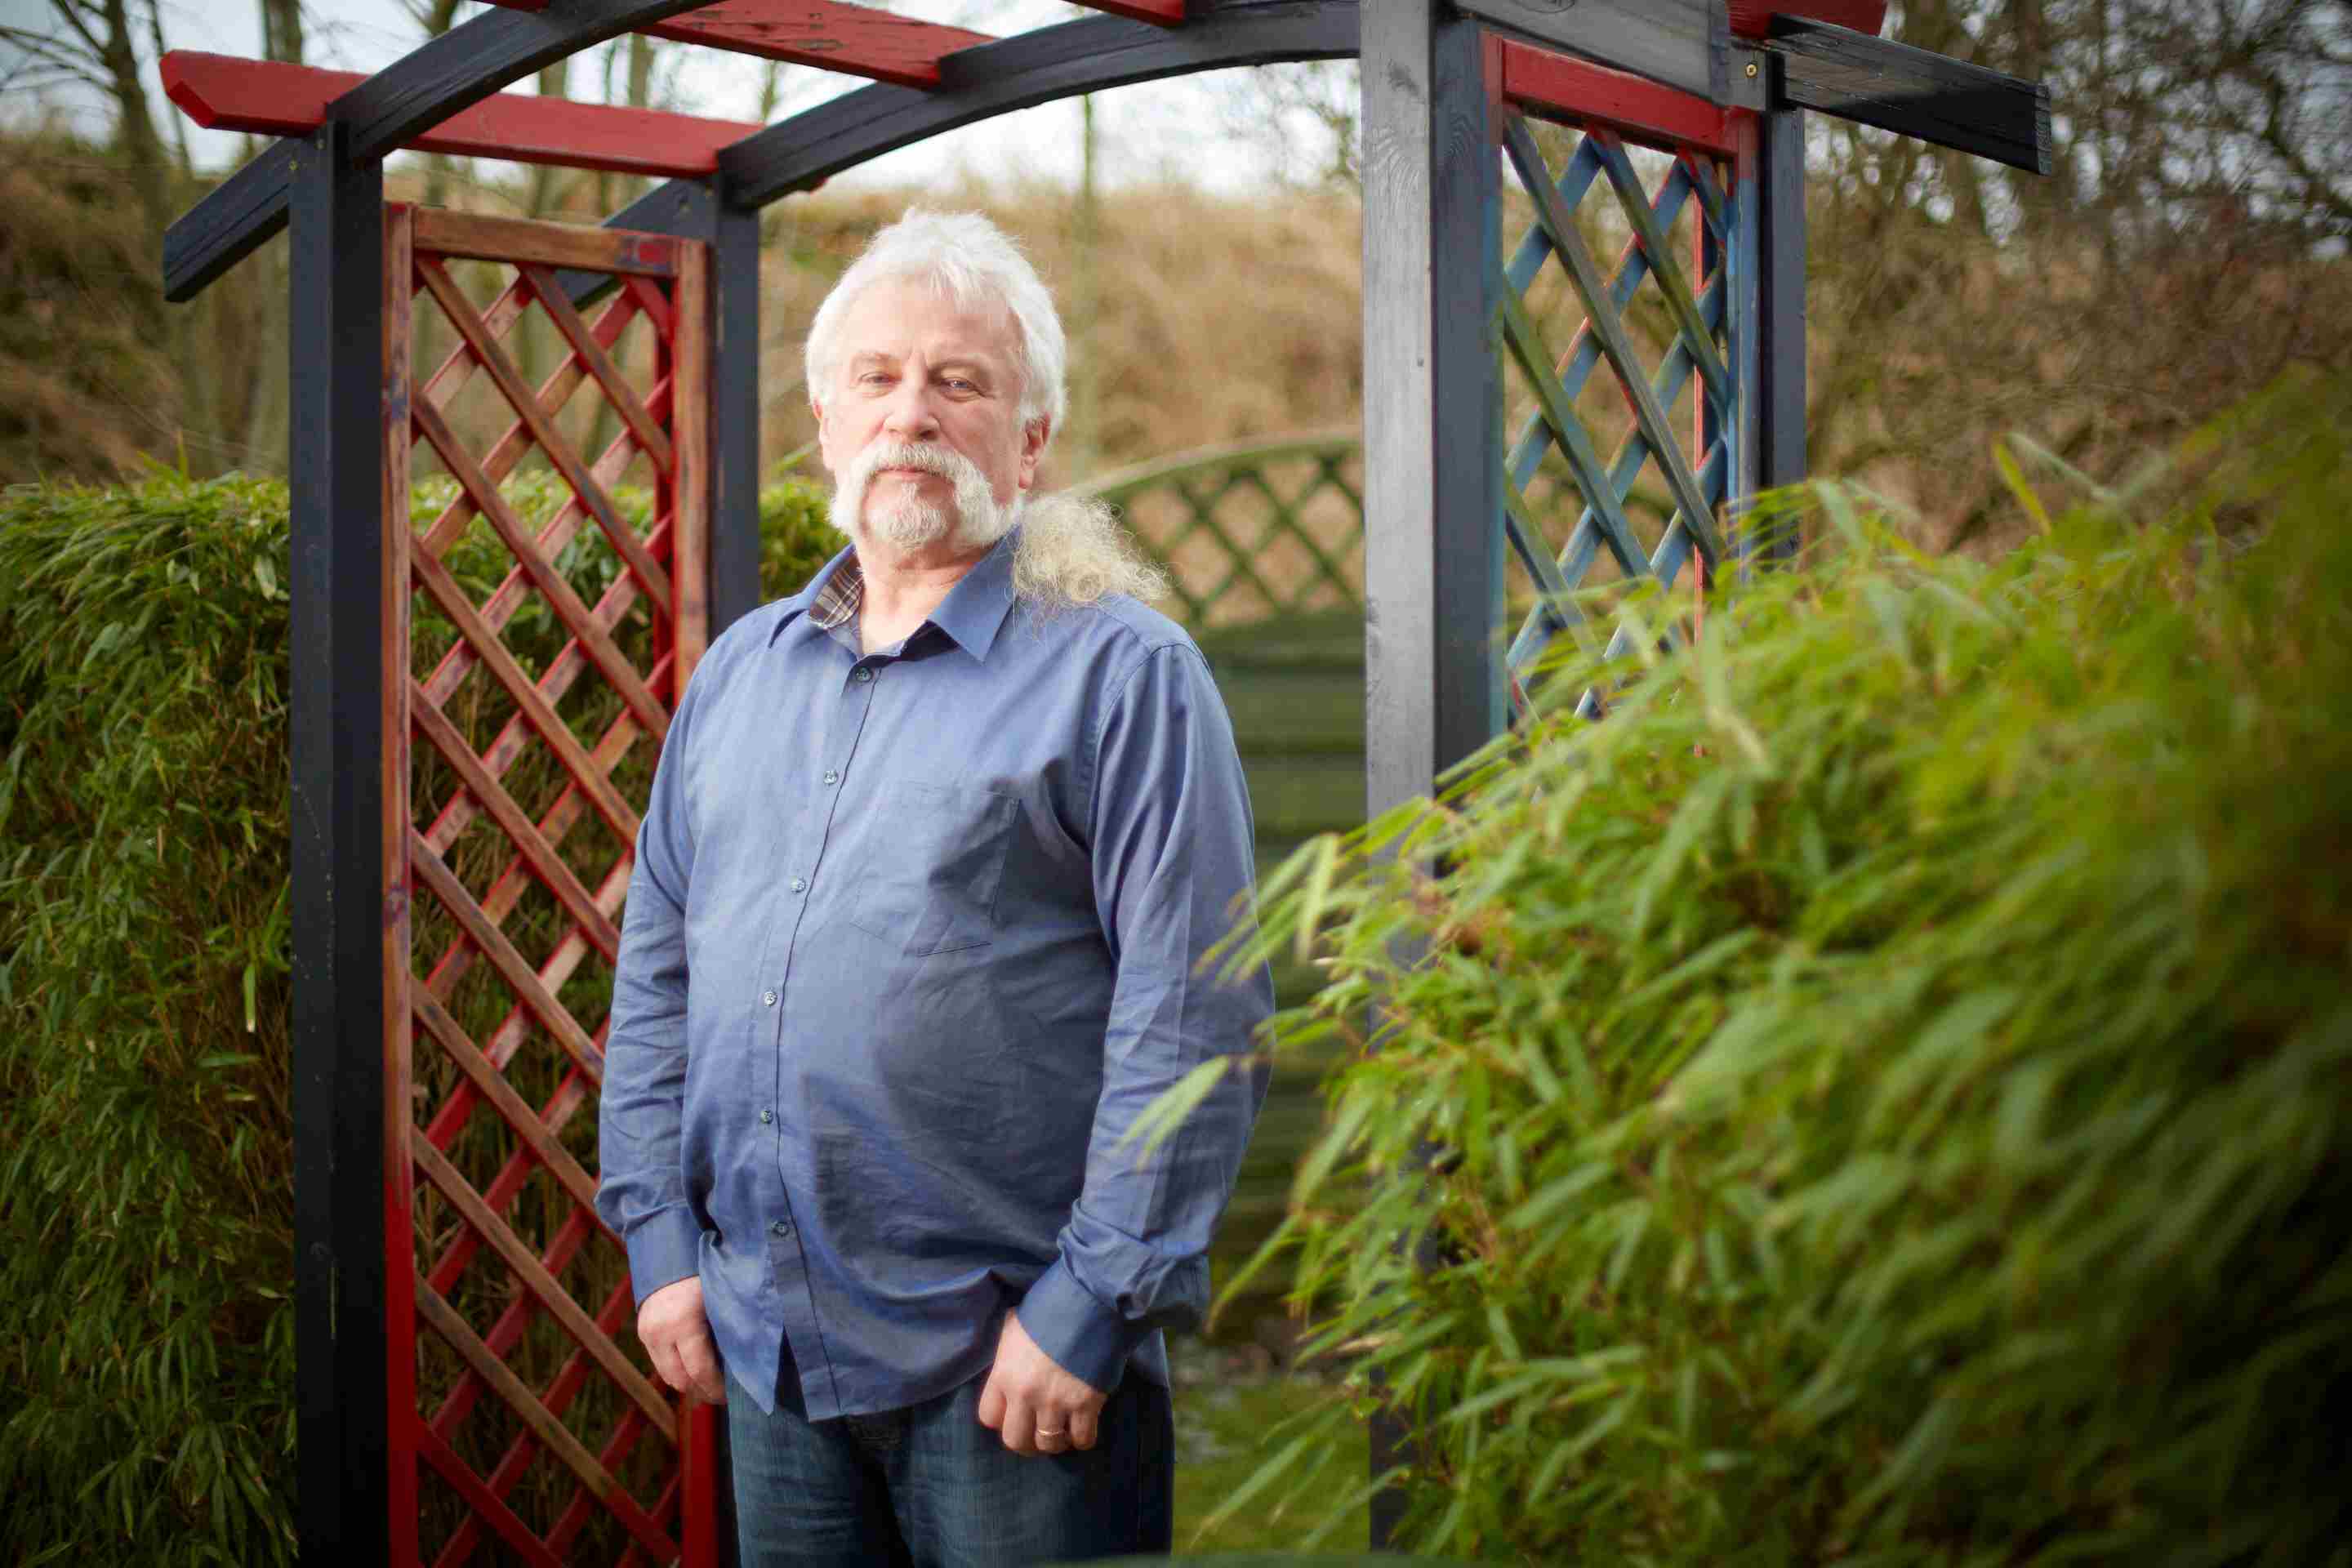 A man in a blue shirt with white hair stands in a garden archway, hands in pockets